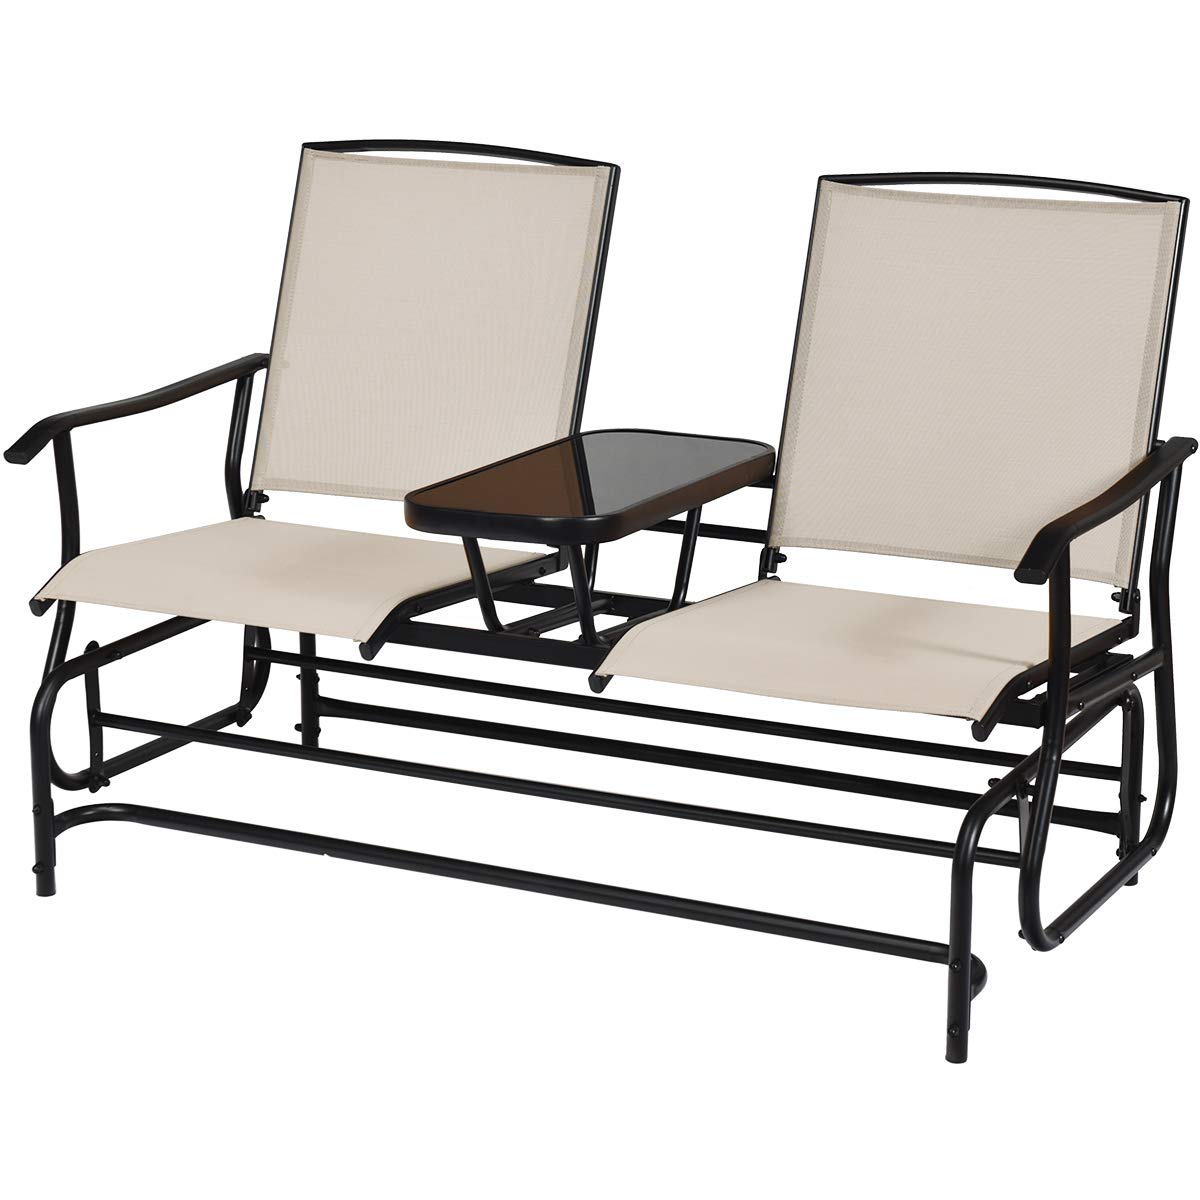 Giantex 2 Person Outdoor Double Glider Chair, Mesh Fabric Rocking Chair w/Center Tempered Glass Table